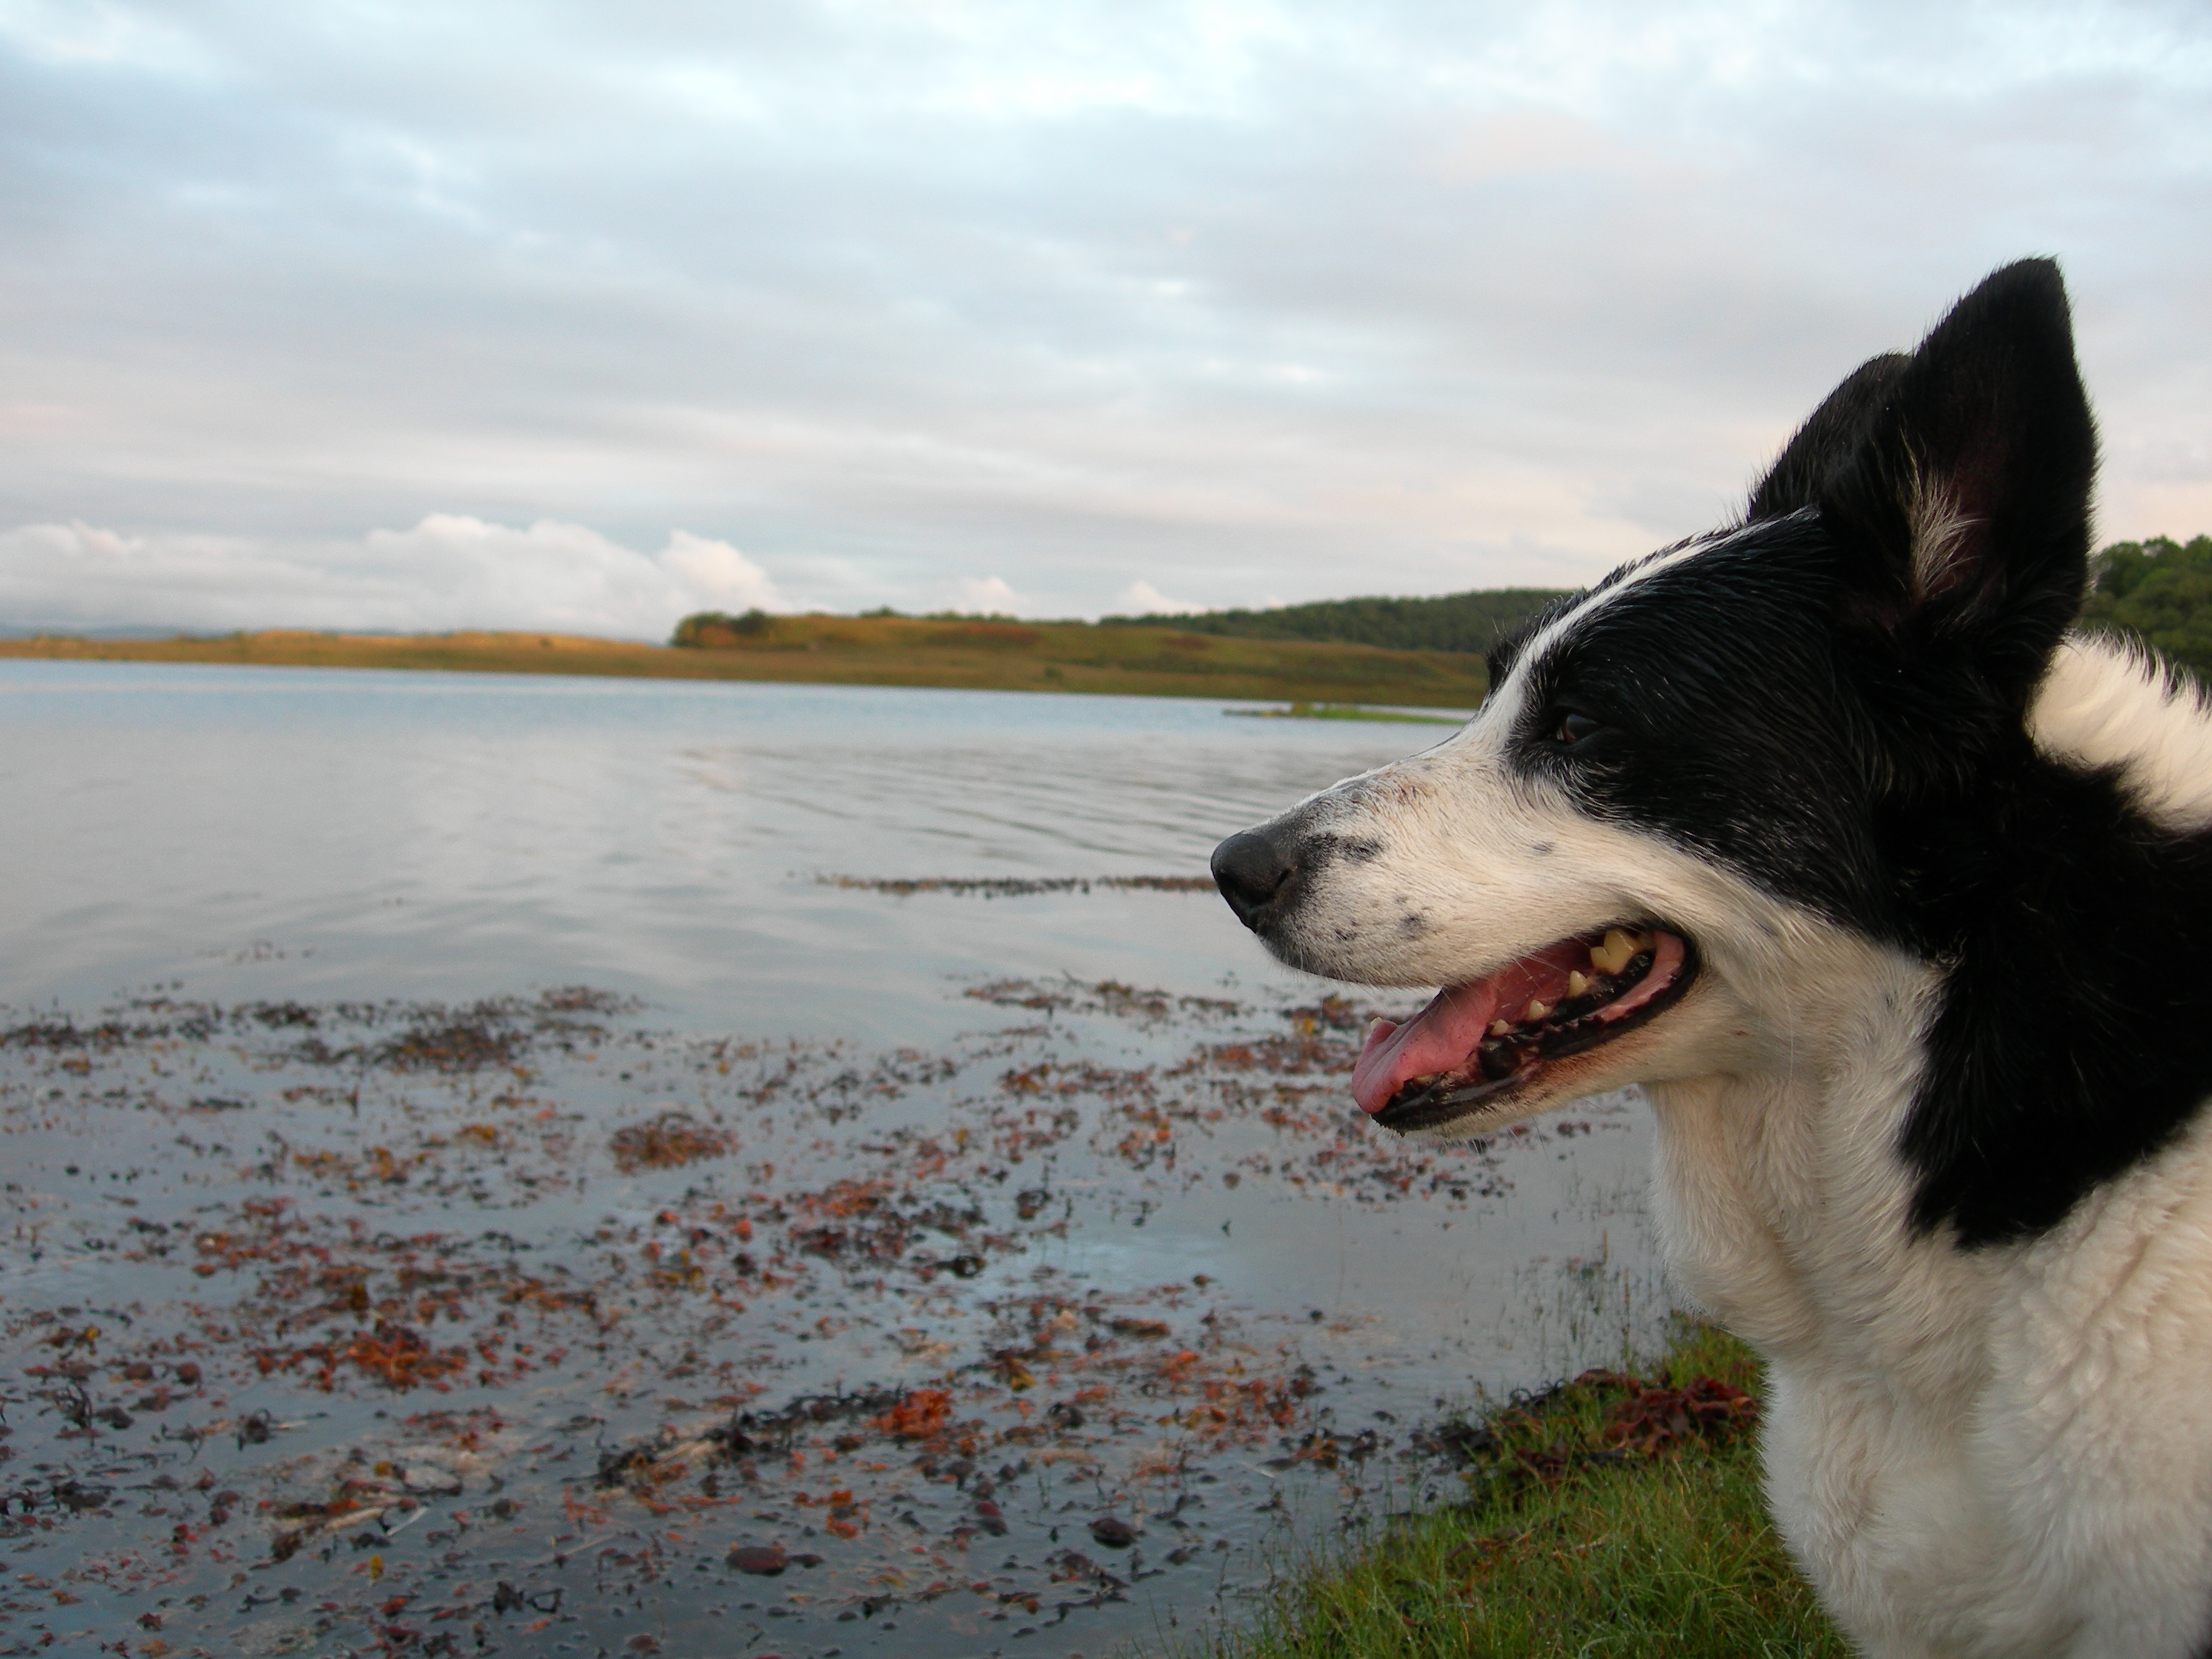 Leaving your pets on holiday can be both expensive and sad, so why not bring them with you? Your dogs are welcome here in our pet friendly holiday cottages